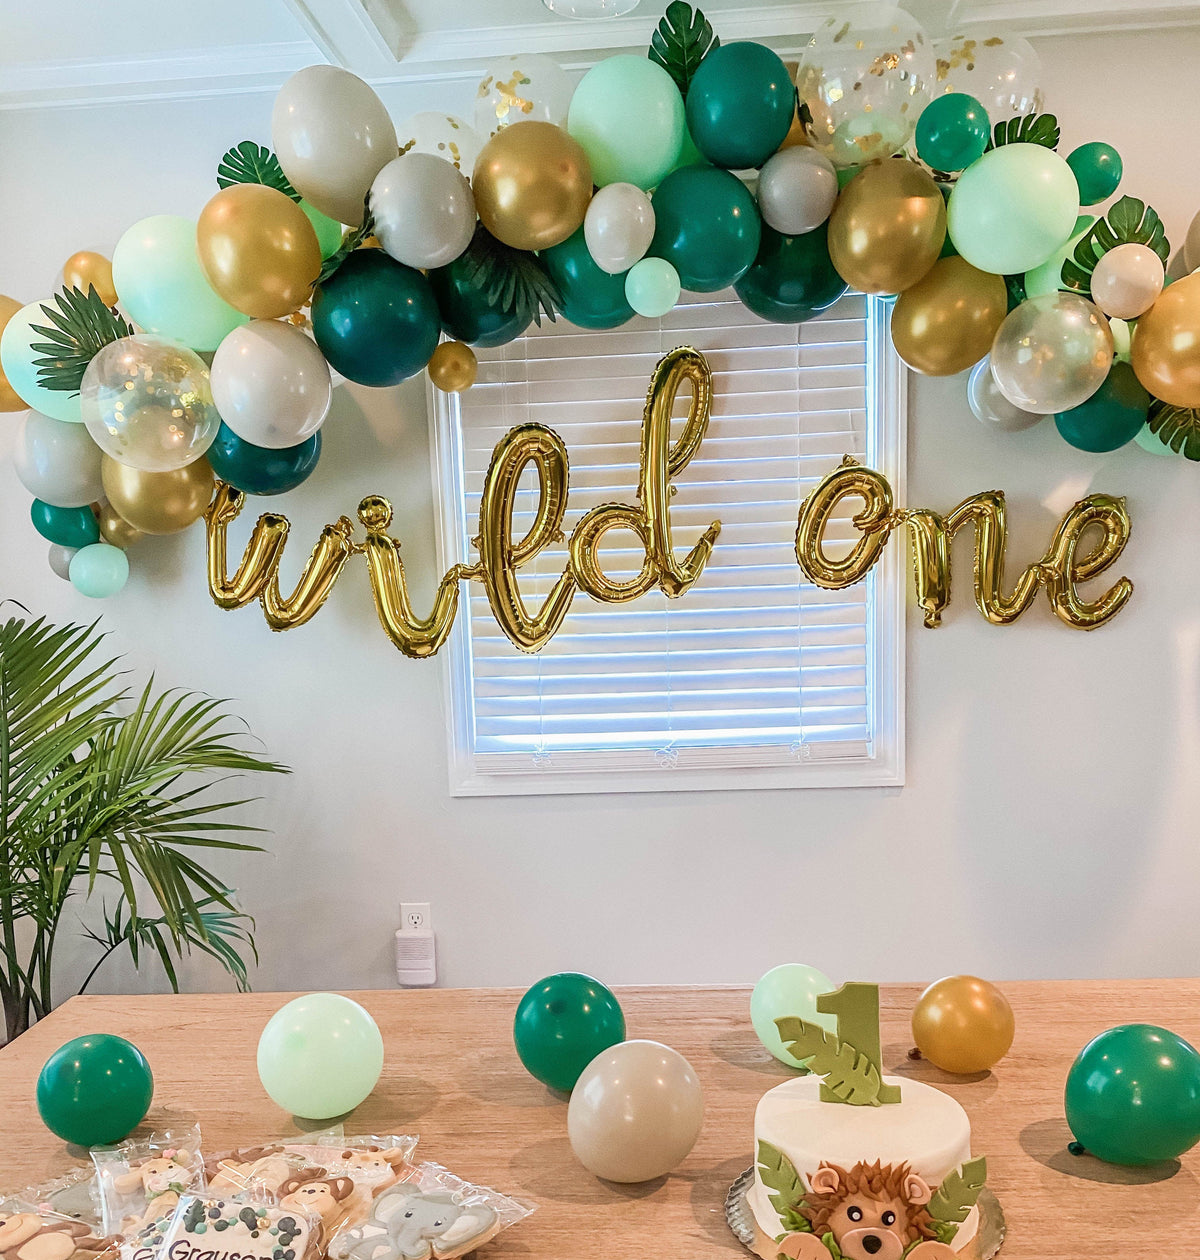 How to Make a Balloon Arch Balloon Garland The Ultimate Guide